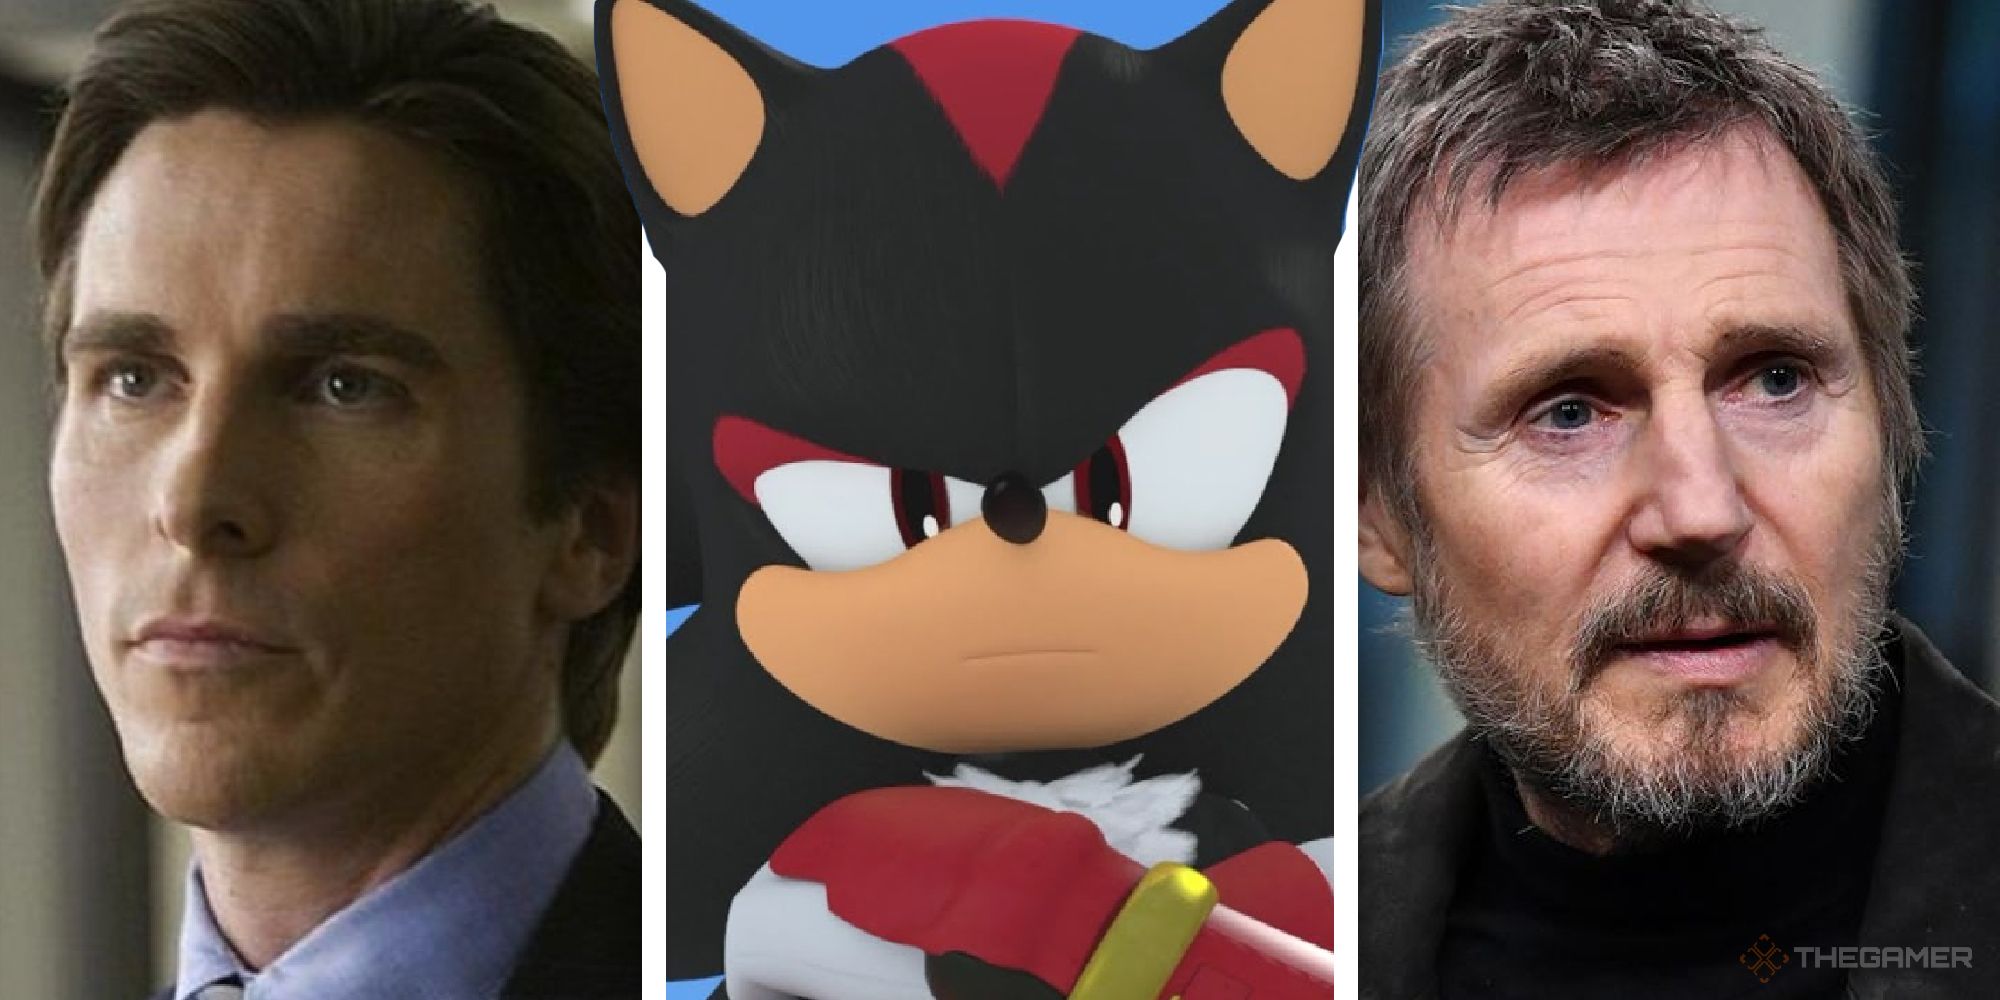 sonic boom show shadow voice actor